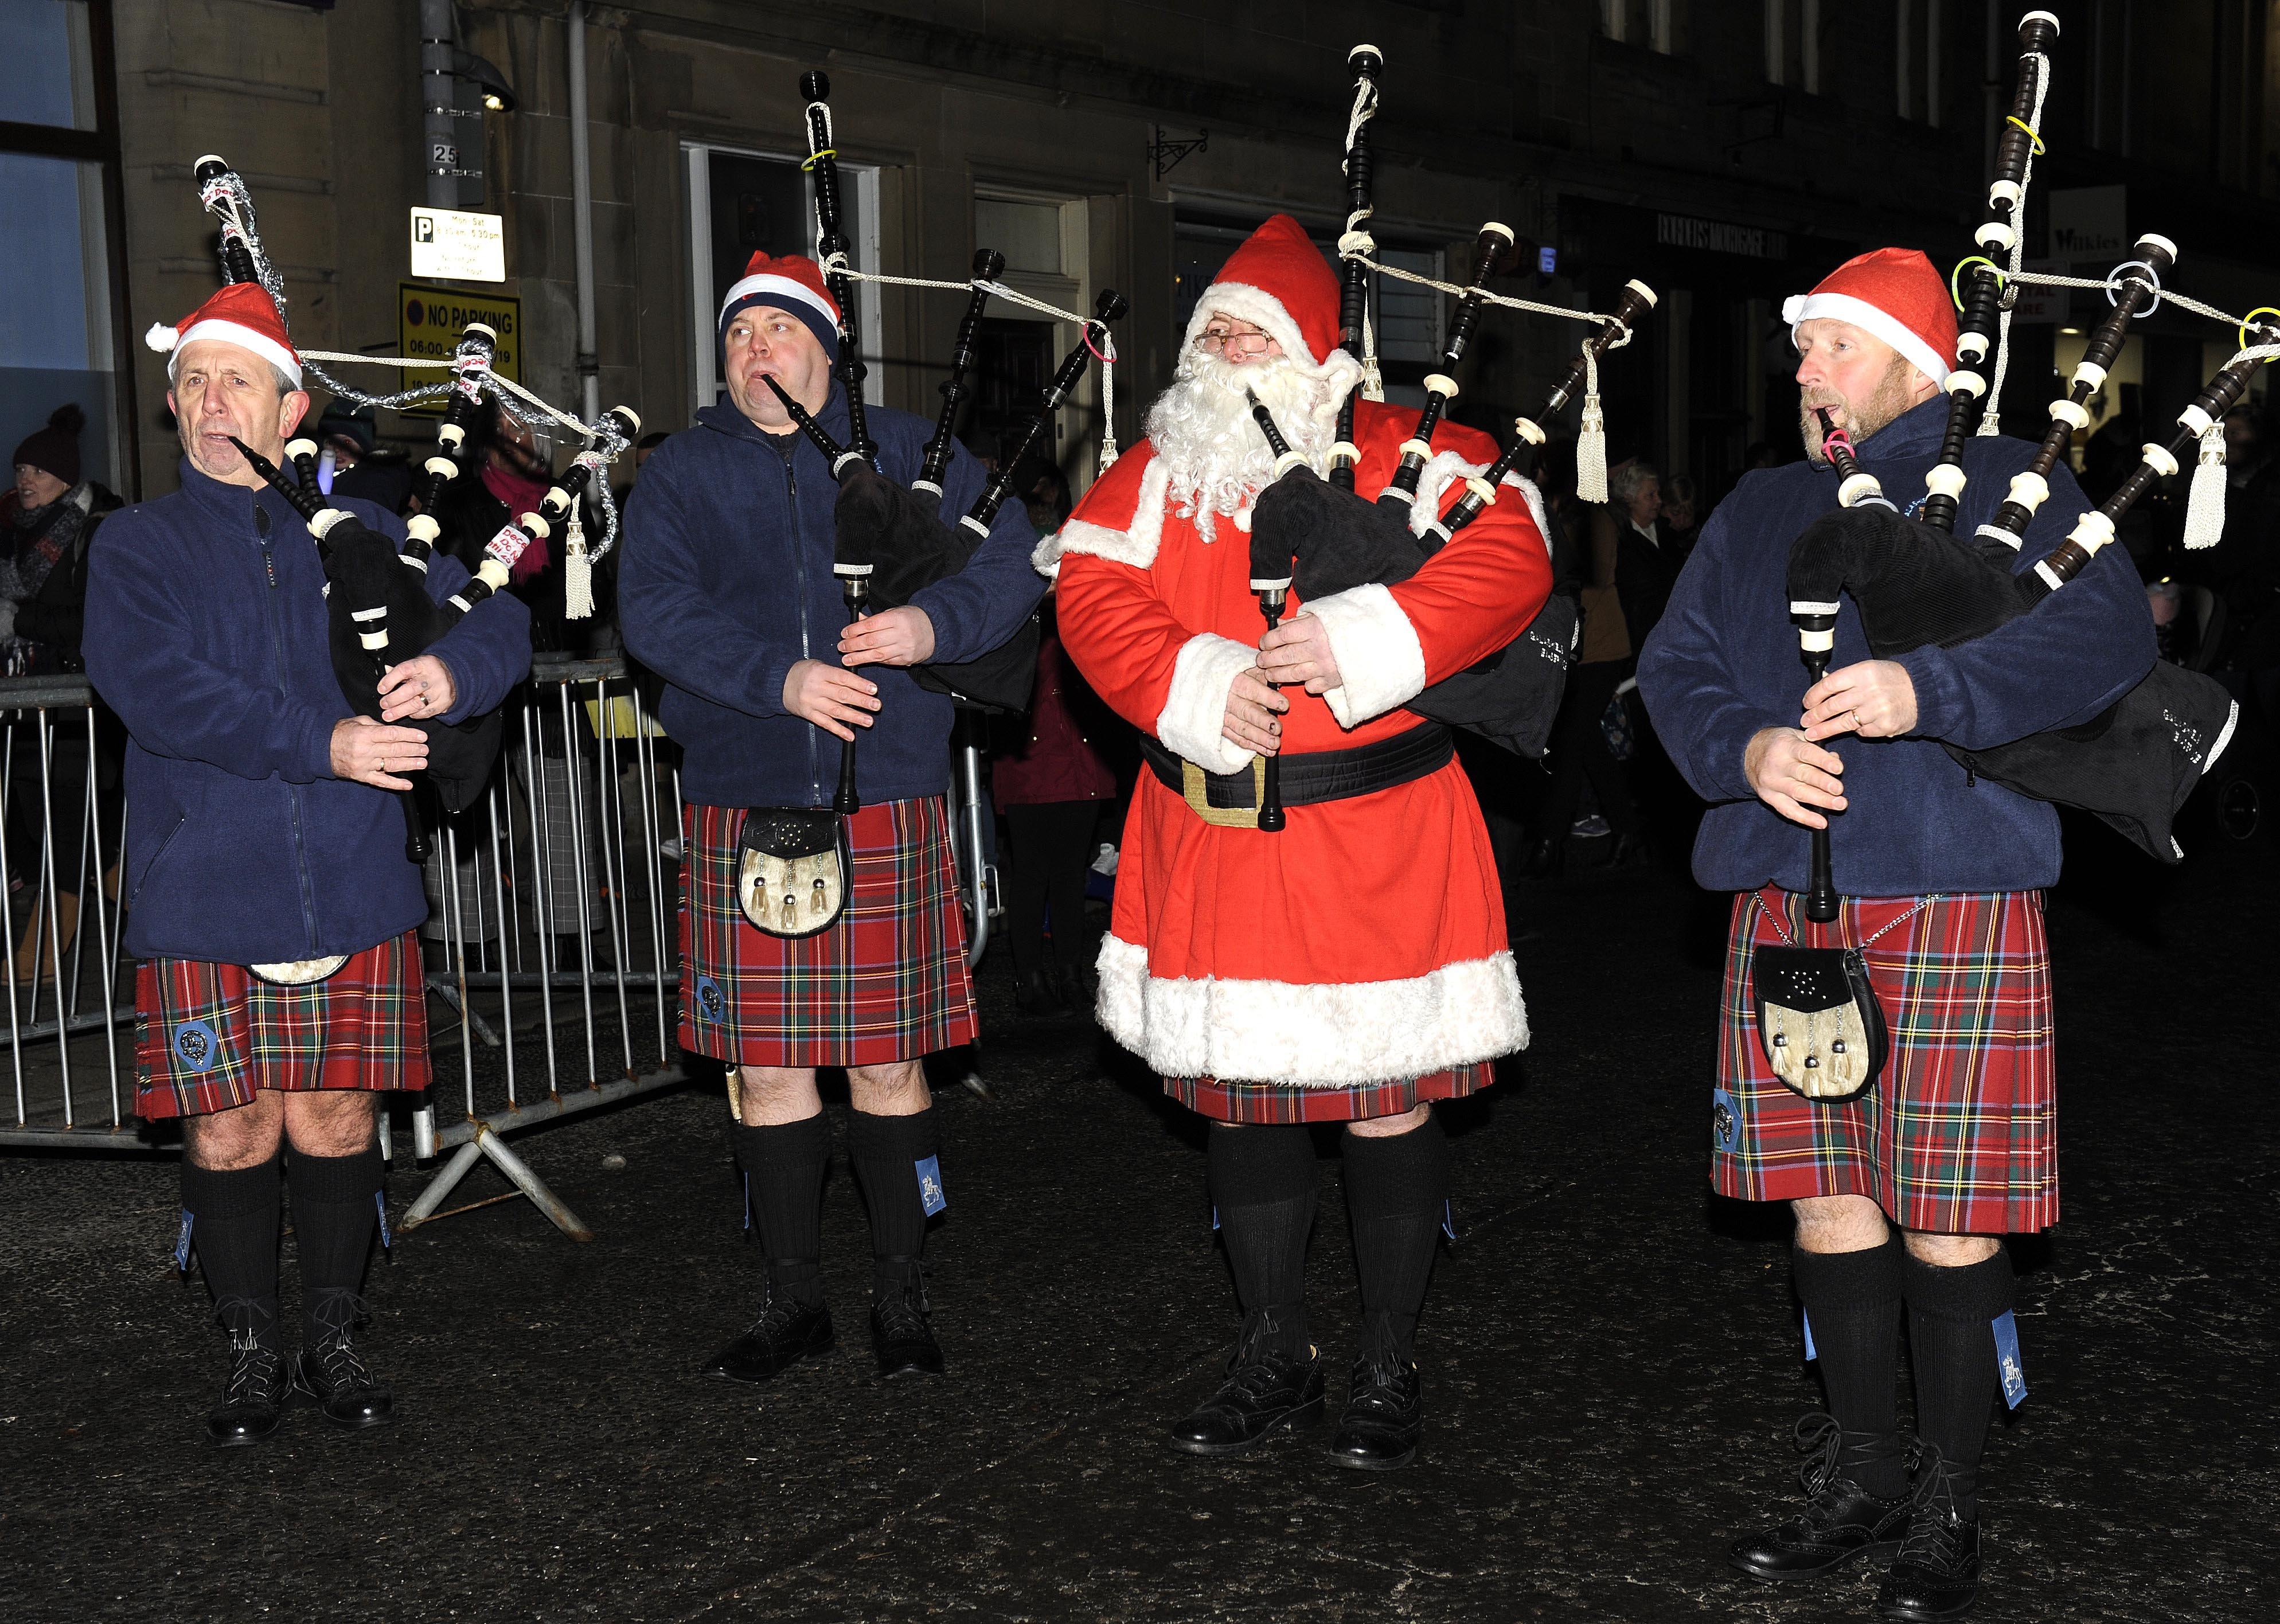 Santa helps out the pipe band.